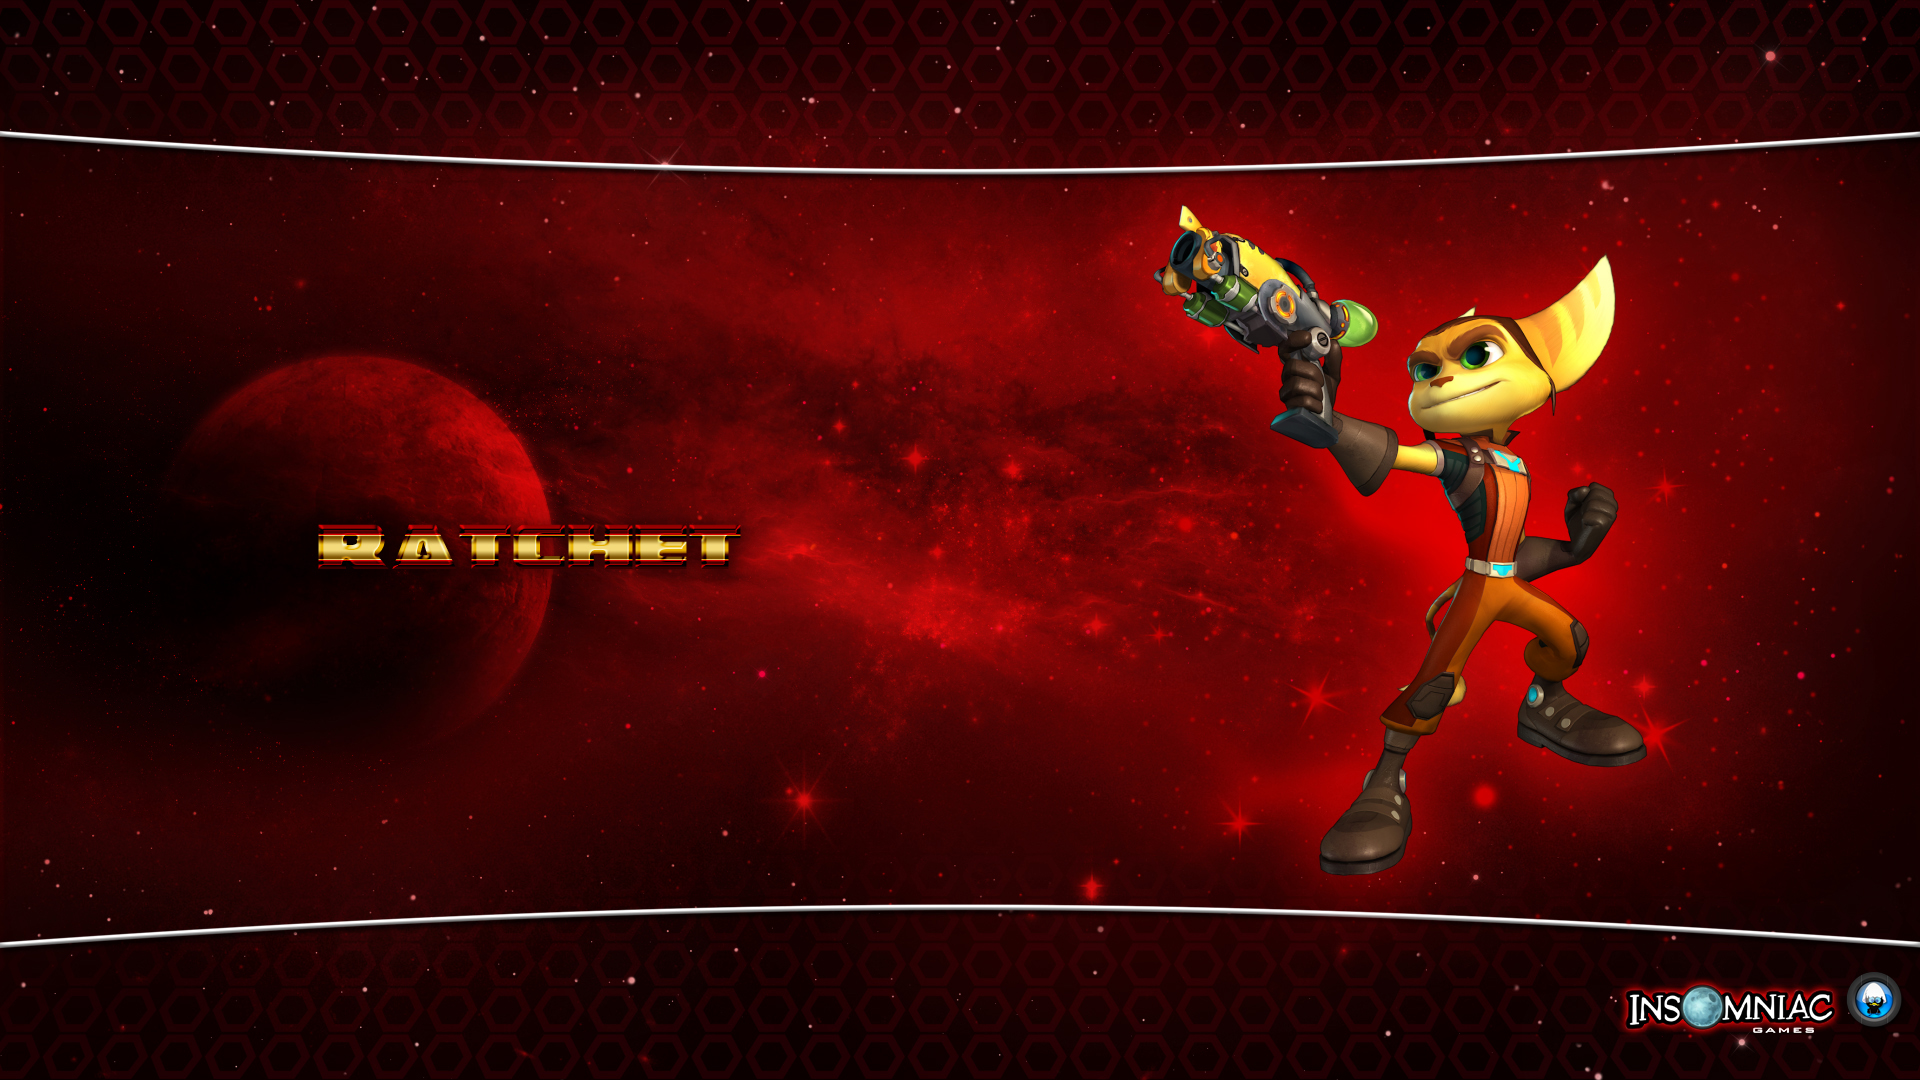 Ratchet and Clank wallpaper 1920x1080 11   hebusorg   High